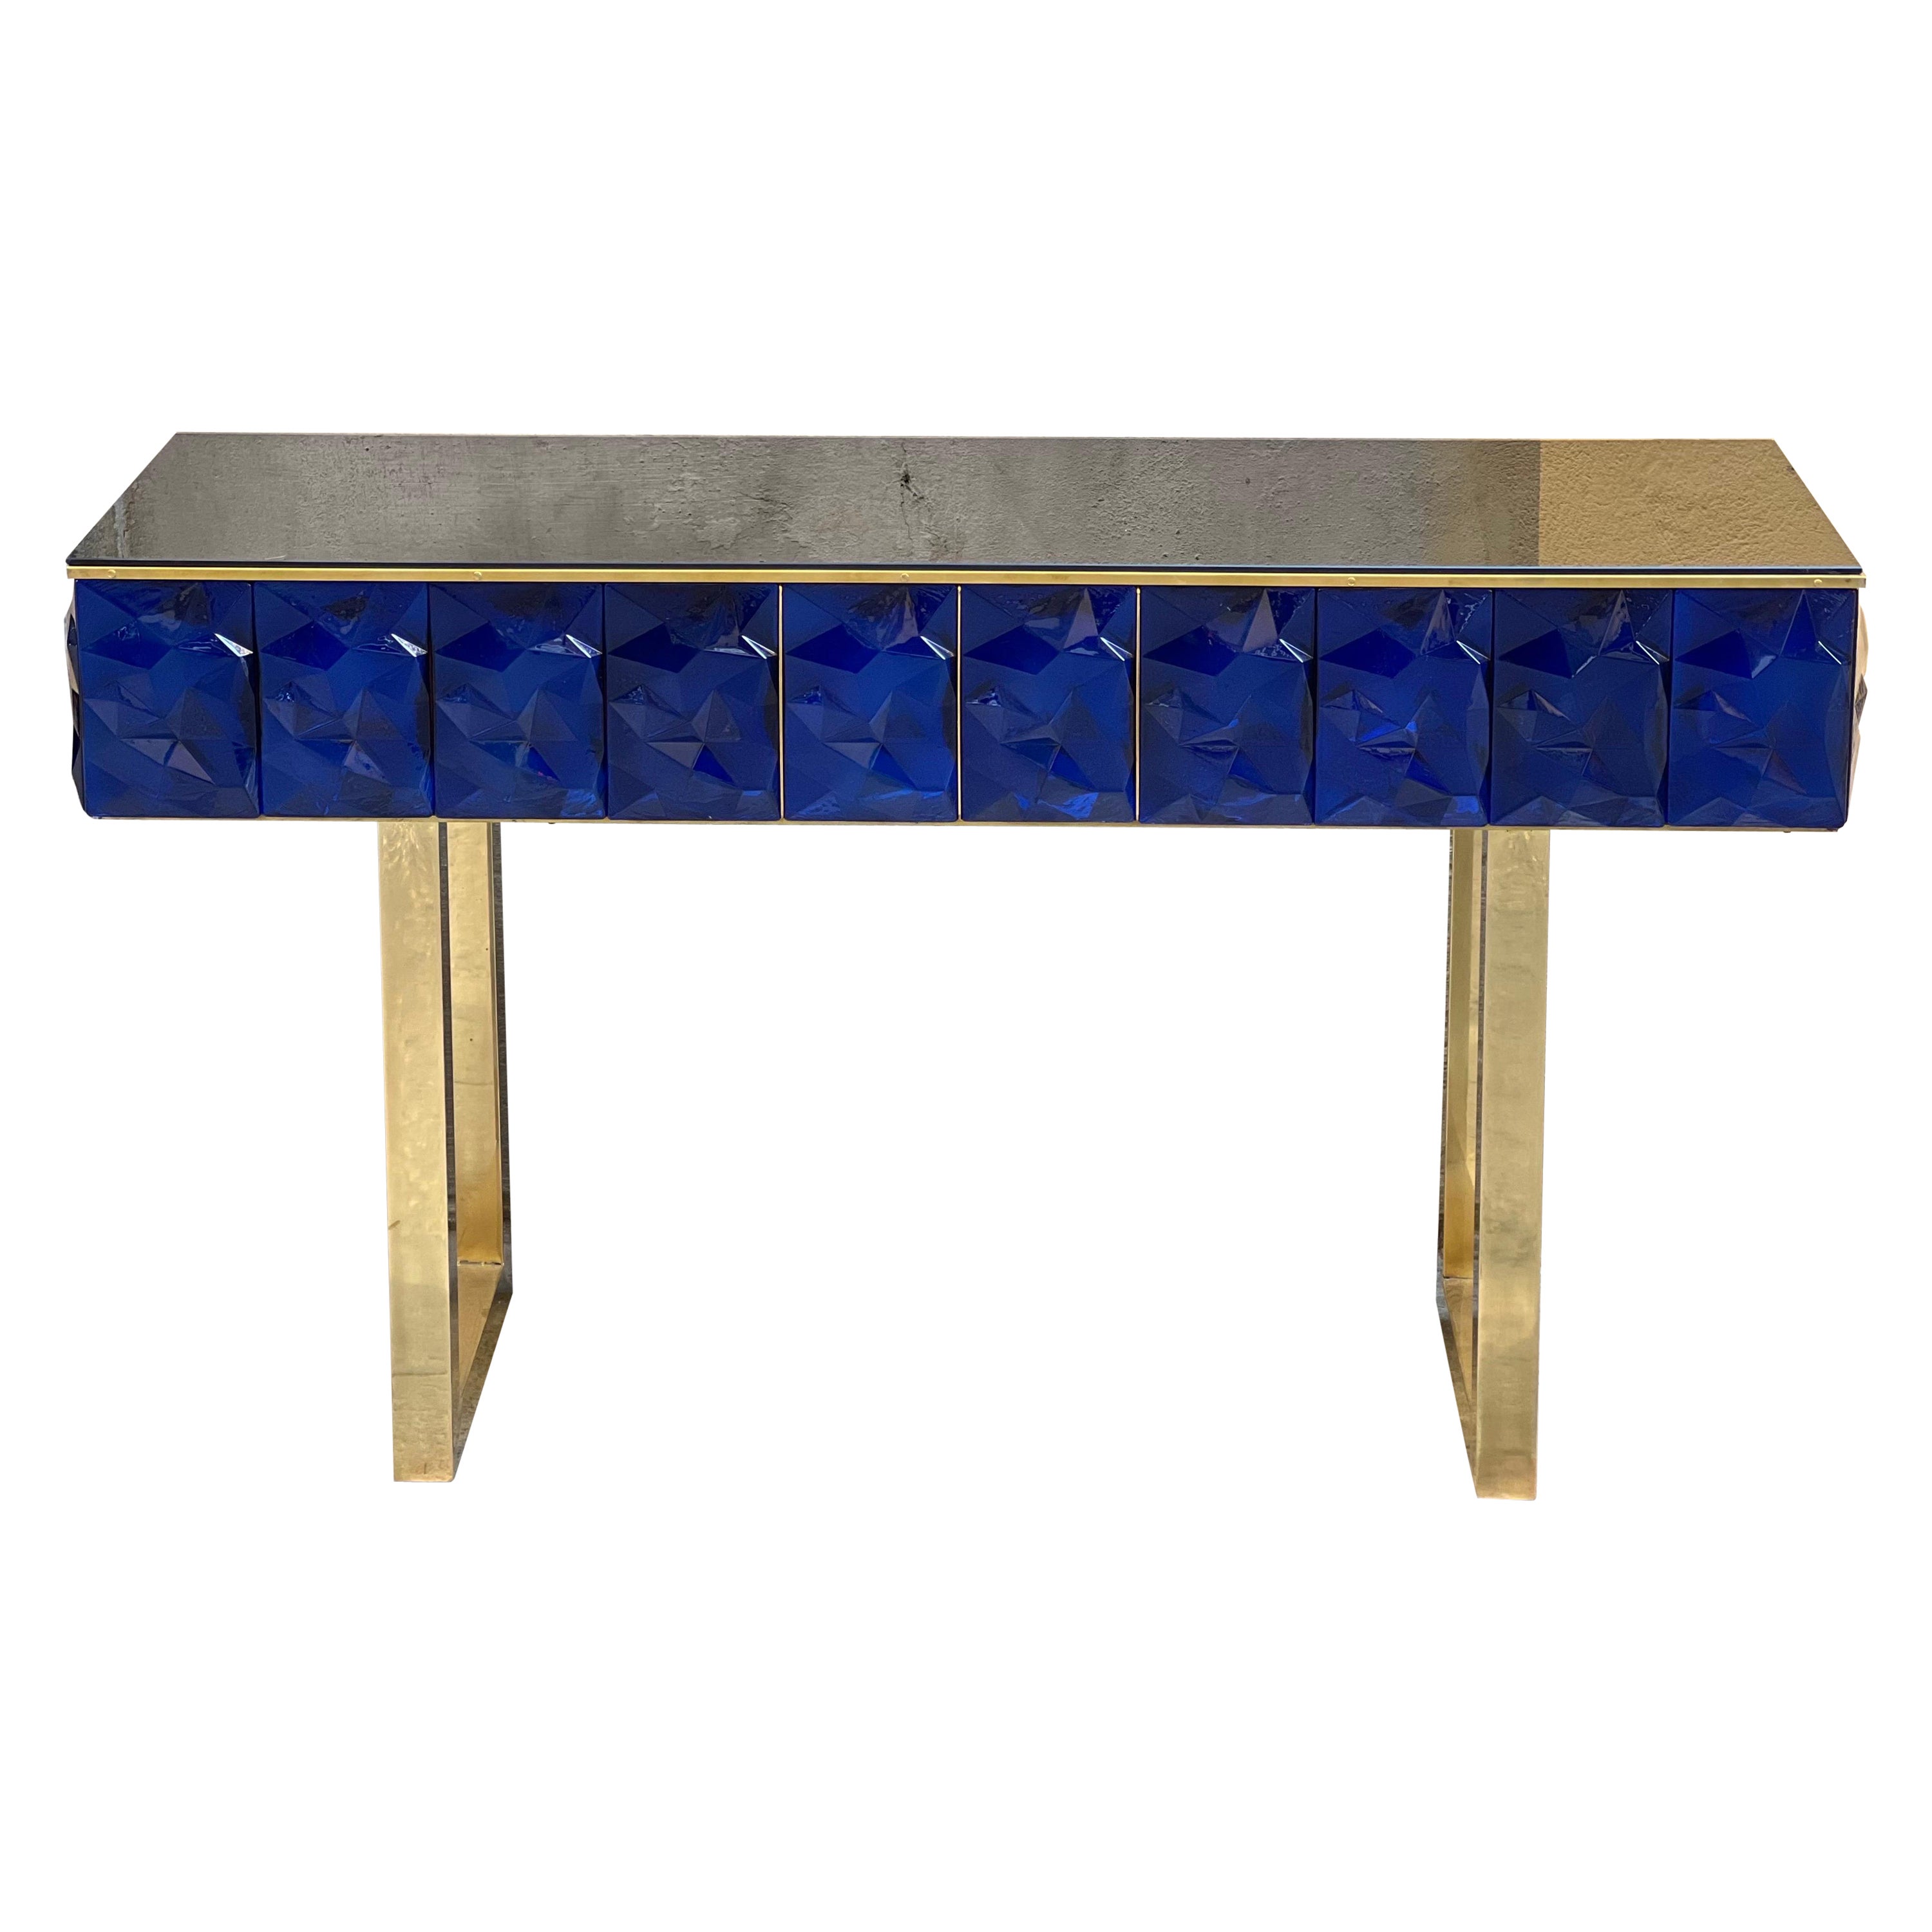 Contemporary Cut Diamond Shape Blue Murano Glass Console with Black Opaline glass top and brass structure and fittings.
The blue Murano glass has a faceted shape diamond effect, the light passing through creates an amazing sparkling effect.
Italian